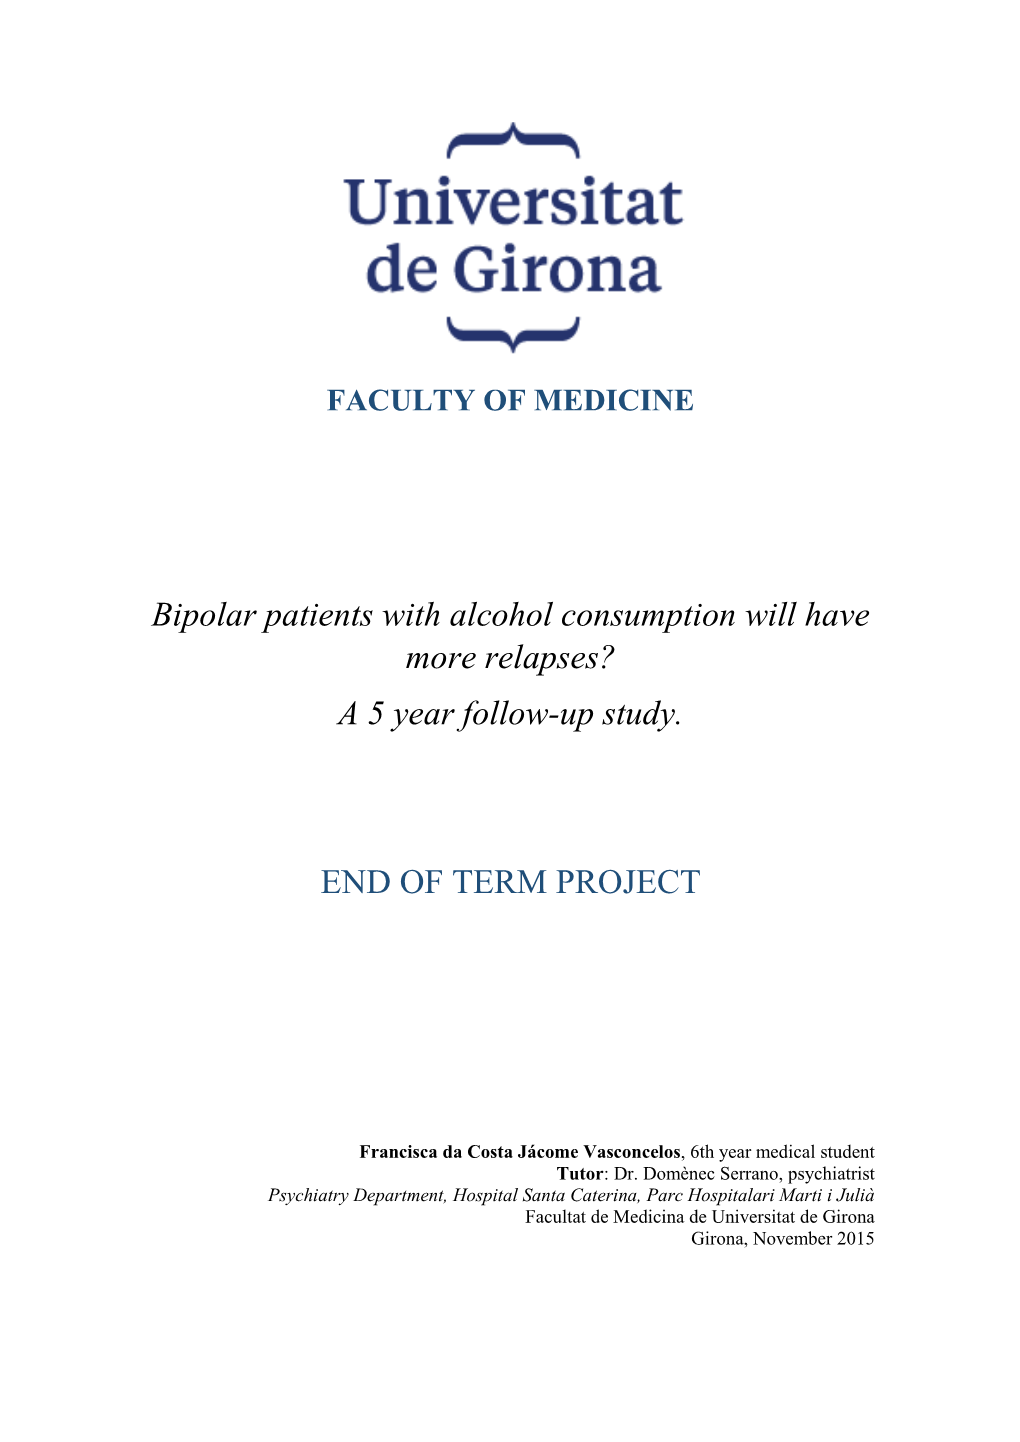 Bipolar Patients with Alcohol Consumption Will Have More Relapses? a 5 Year Follow-Up Study